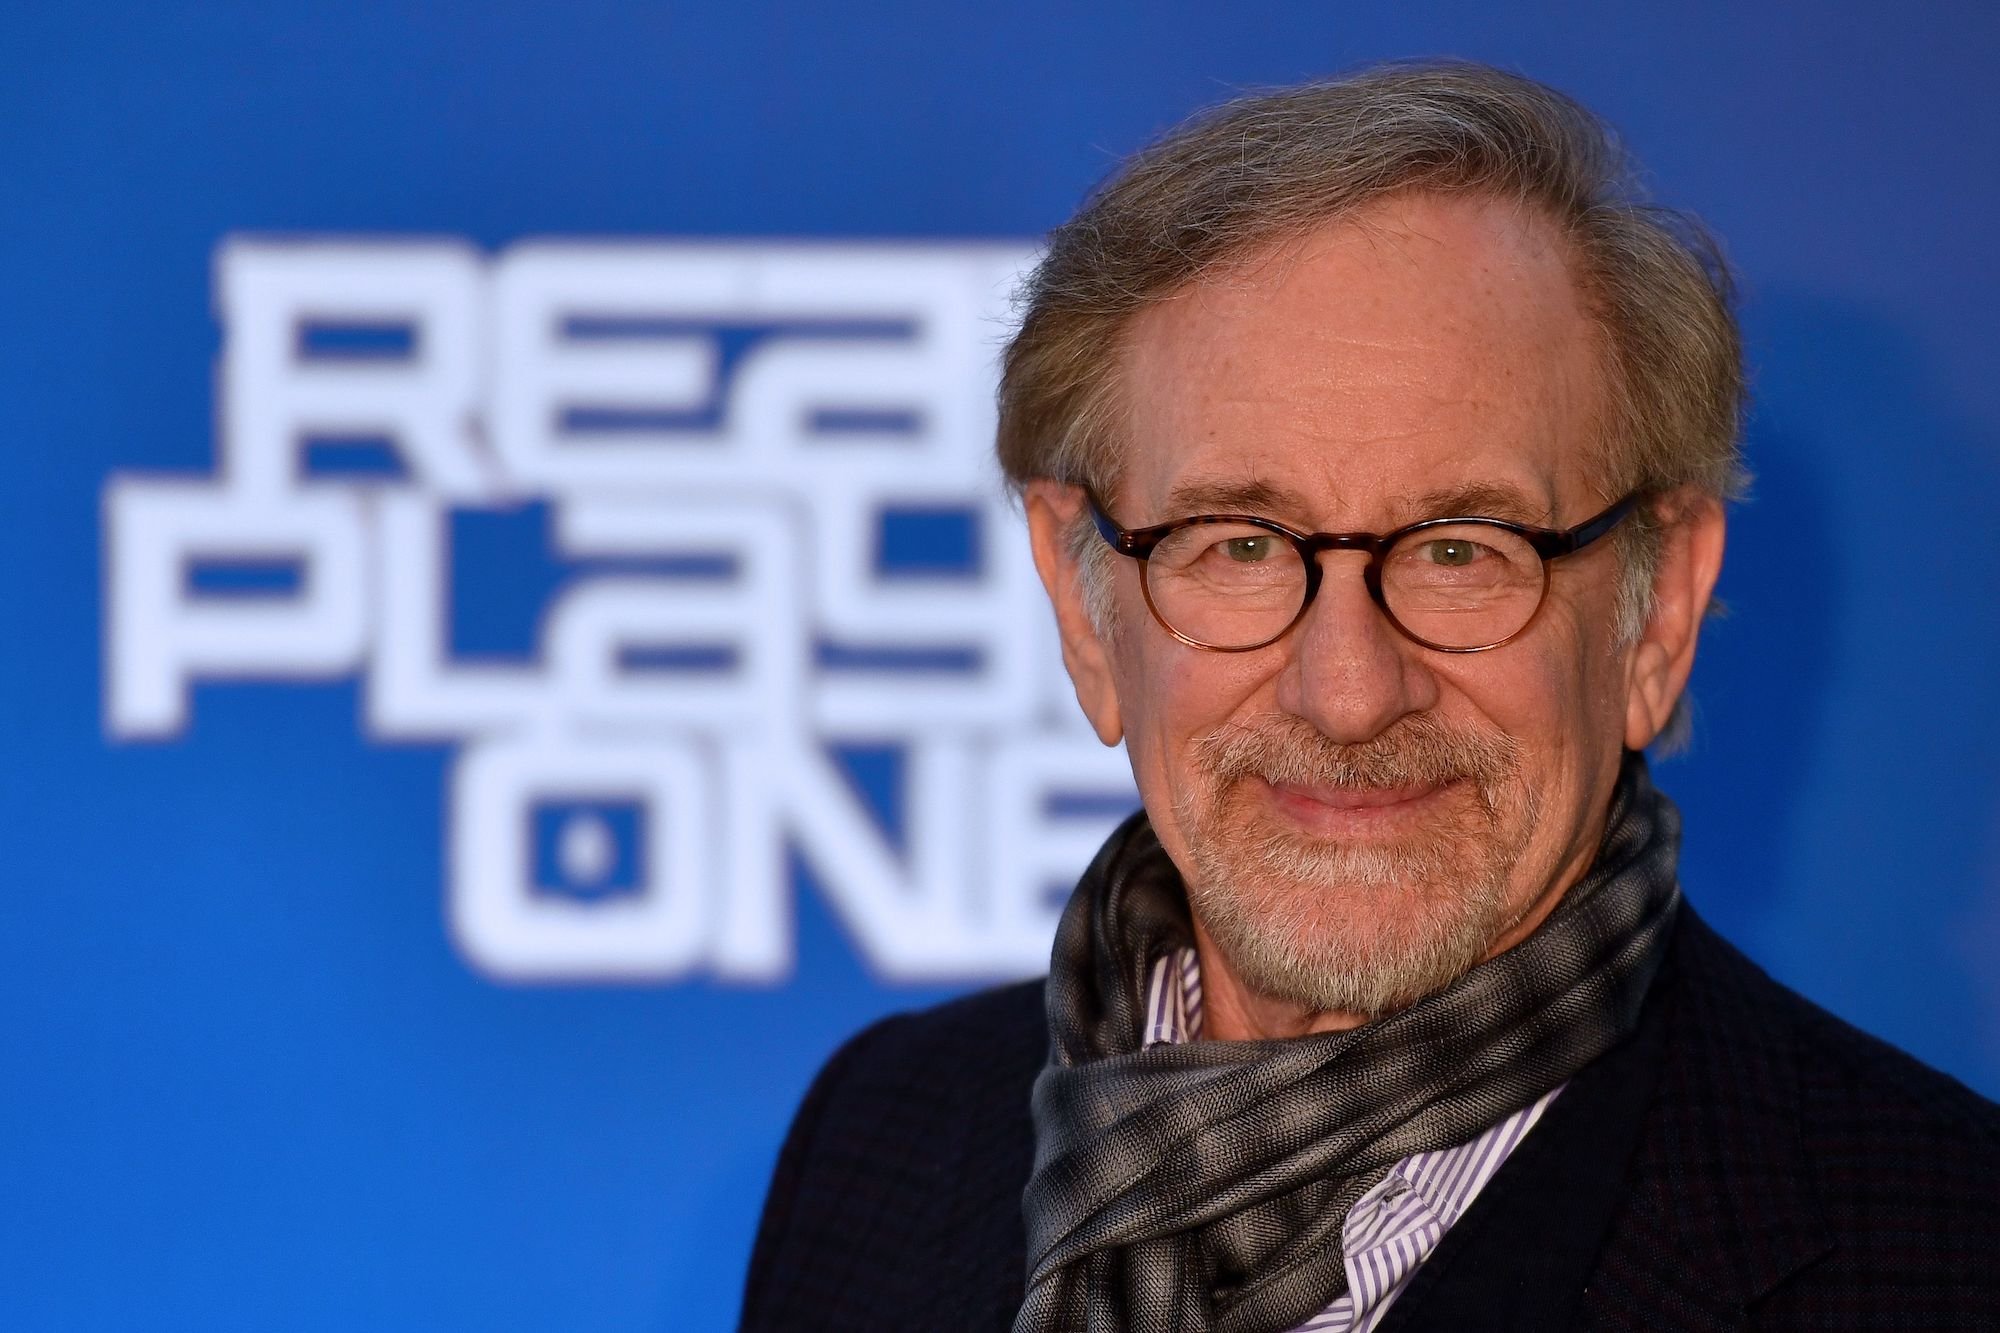 Steven Spielberg smiling in front of a blue background